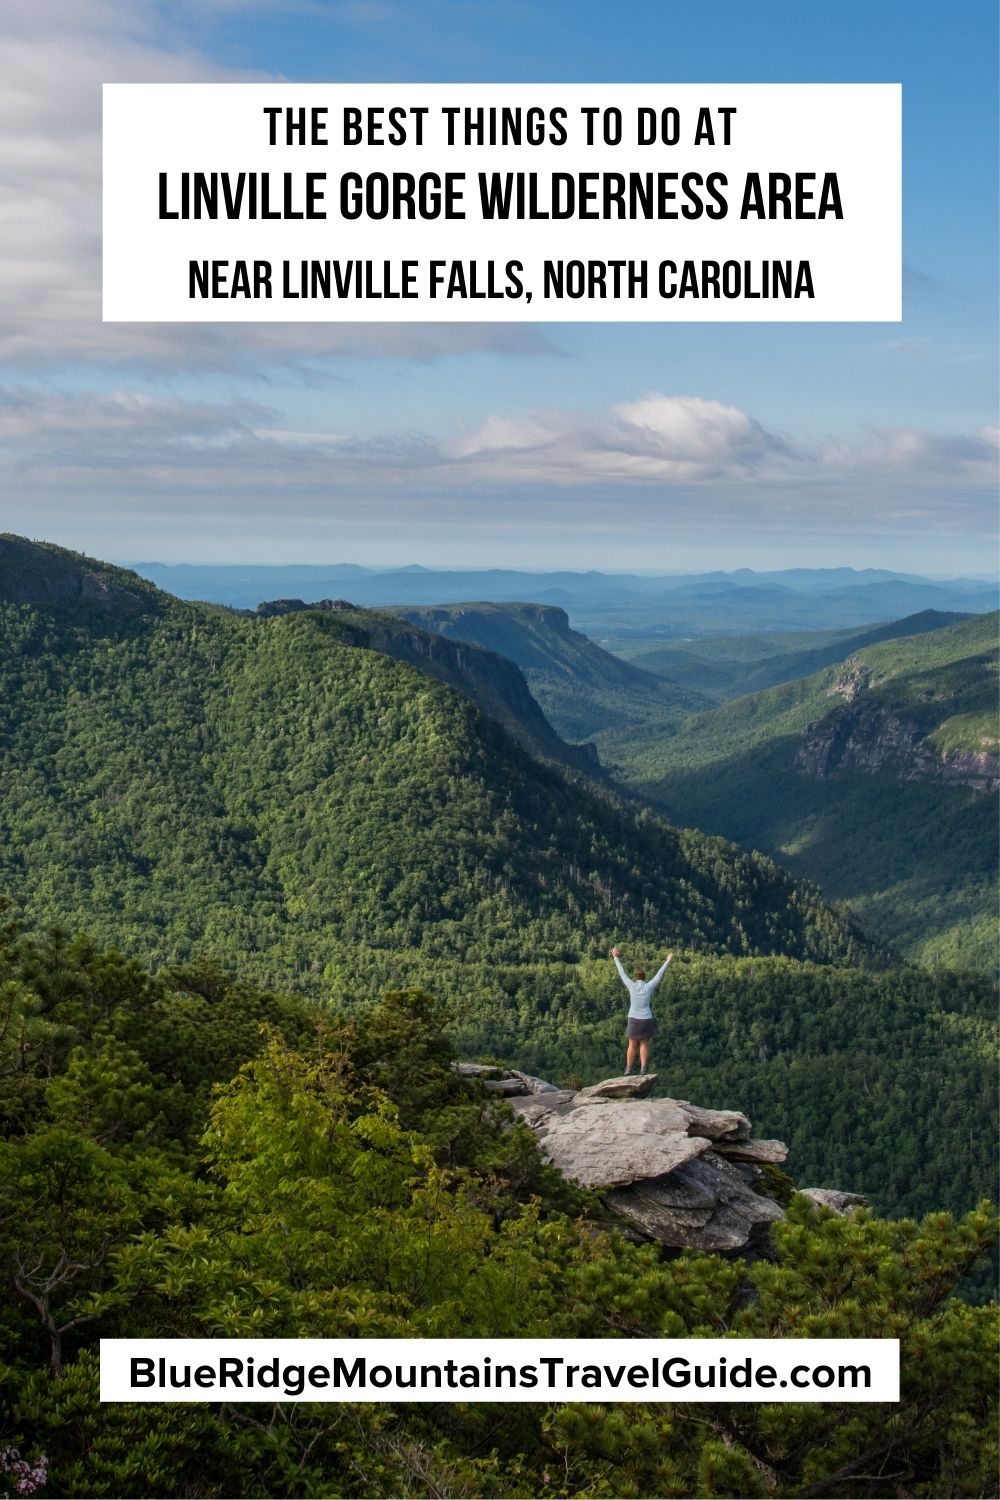 Not to brag, but Linville Gorge Wilderness is giving rugged good looks a  whole new meaning. ✨ Pull on your boots, grab a trail map and…